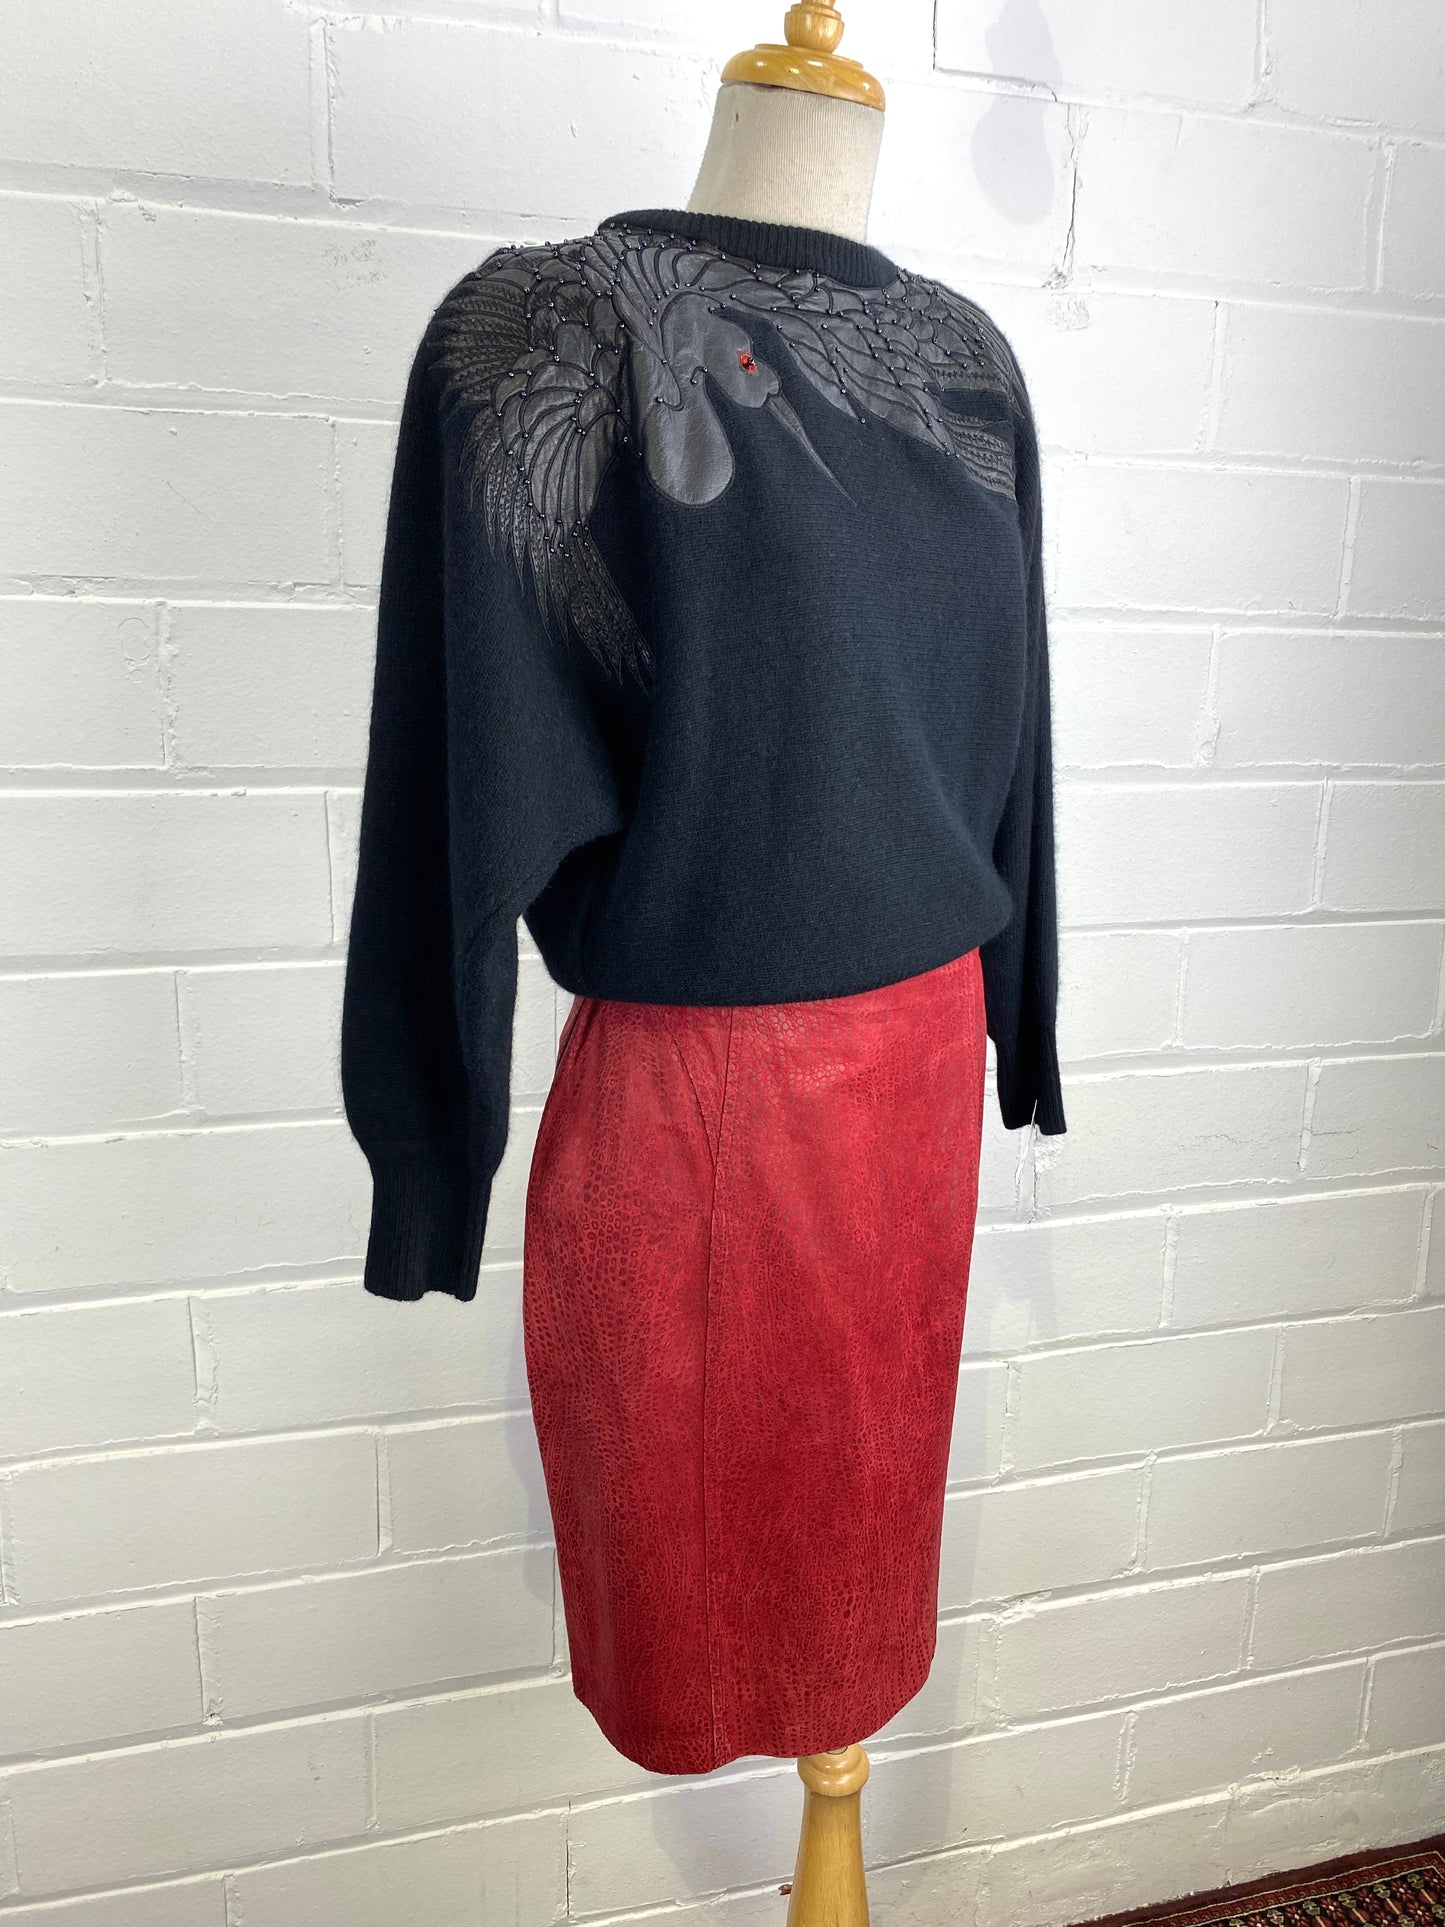 Vintage 1980s Black Wool/ Angora Sweater with Leather Appliqué Bird, Large